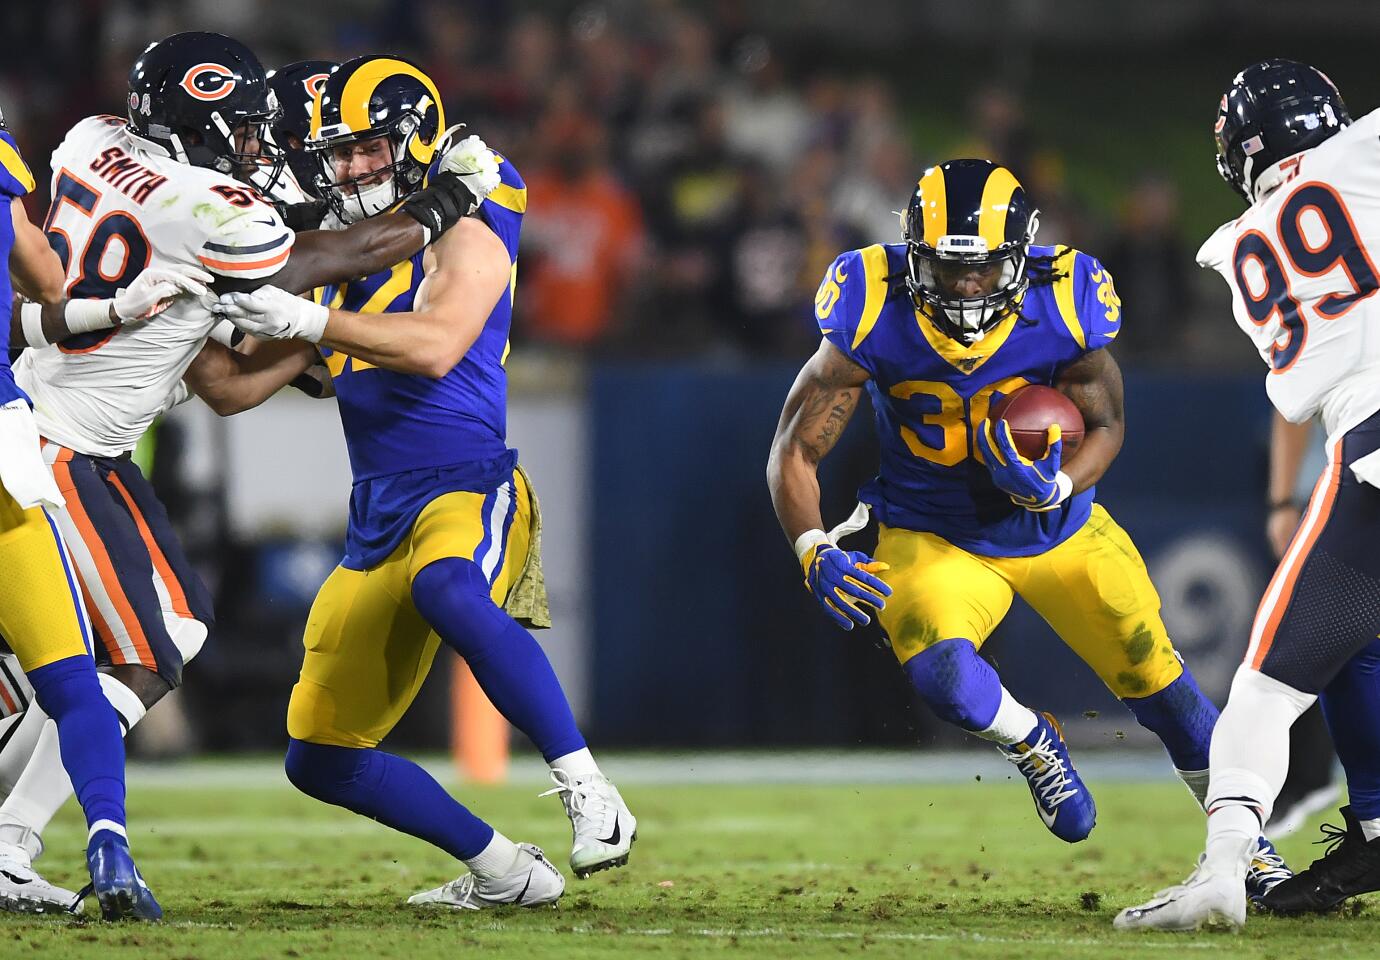 Rams running back Todd Gurley picks up yards against the Bears in the first quarter.